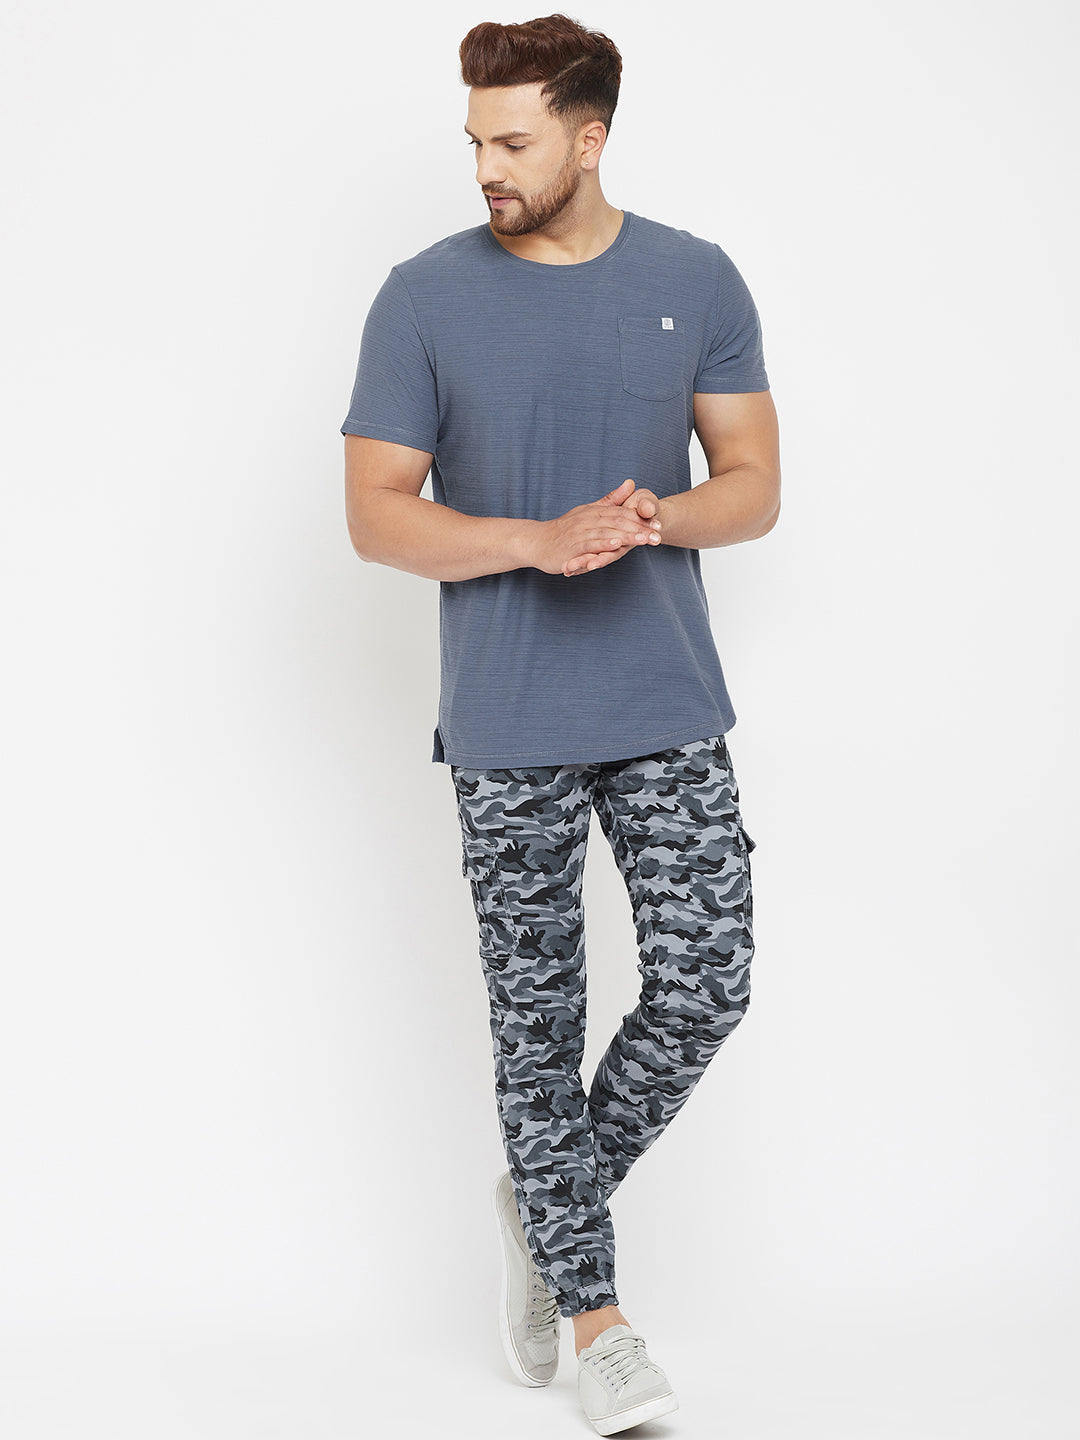 Grey Camouflage Trousers - Men Joggers